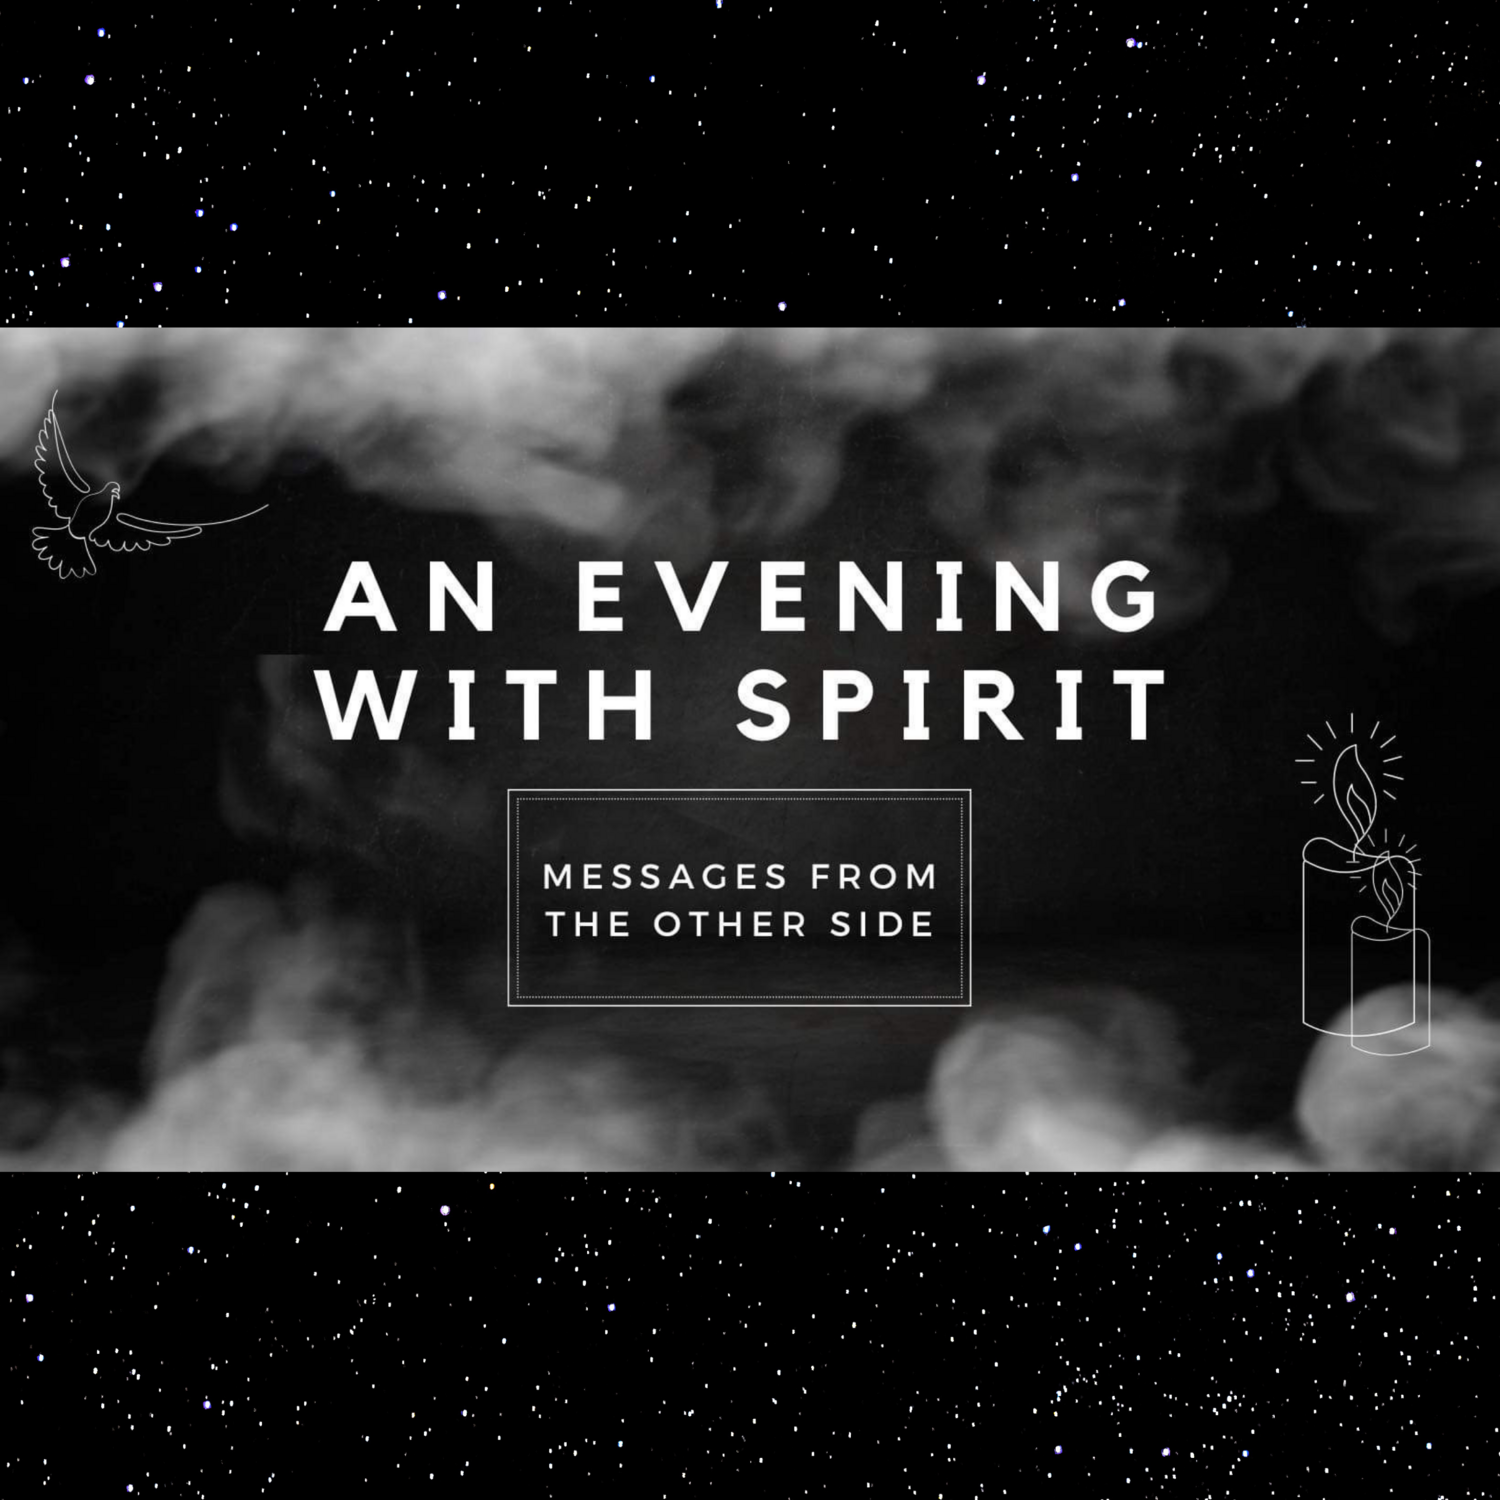 An Evening with Spirit - Wednesday, February 28th